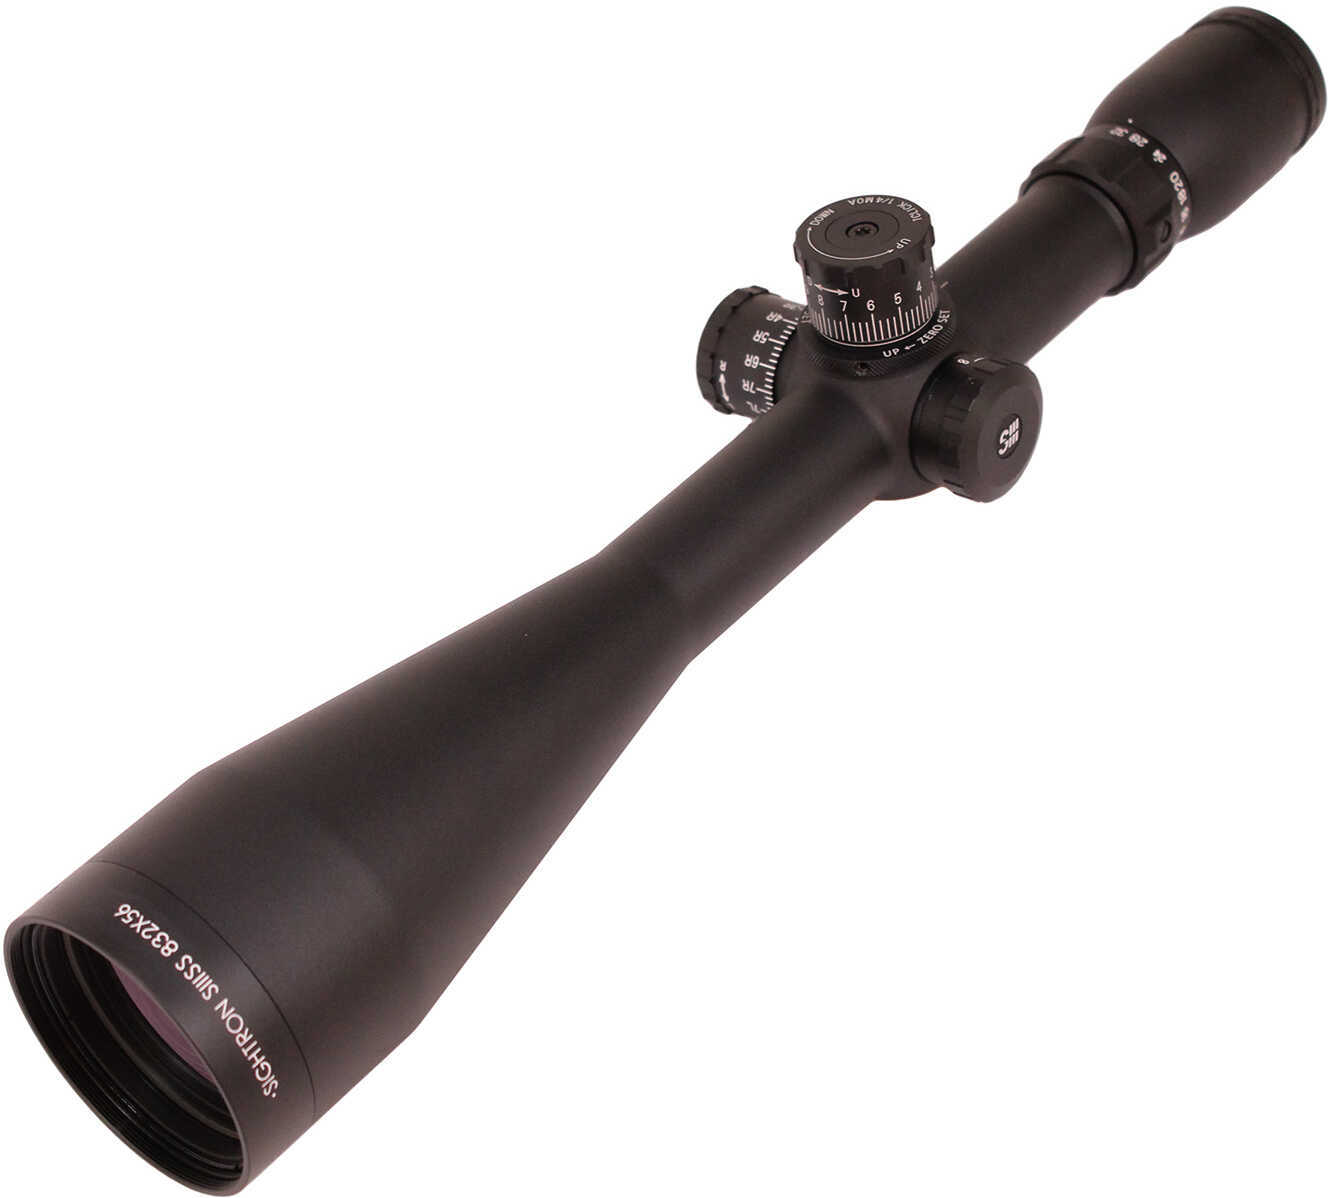 Sightron SIII Rifle Scope 8-32X56mm 30mm Tube MOA-2 Reticle 1/4 MOA Adjustments Second Focal Plane Black Color SIIISS832